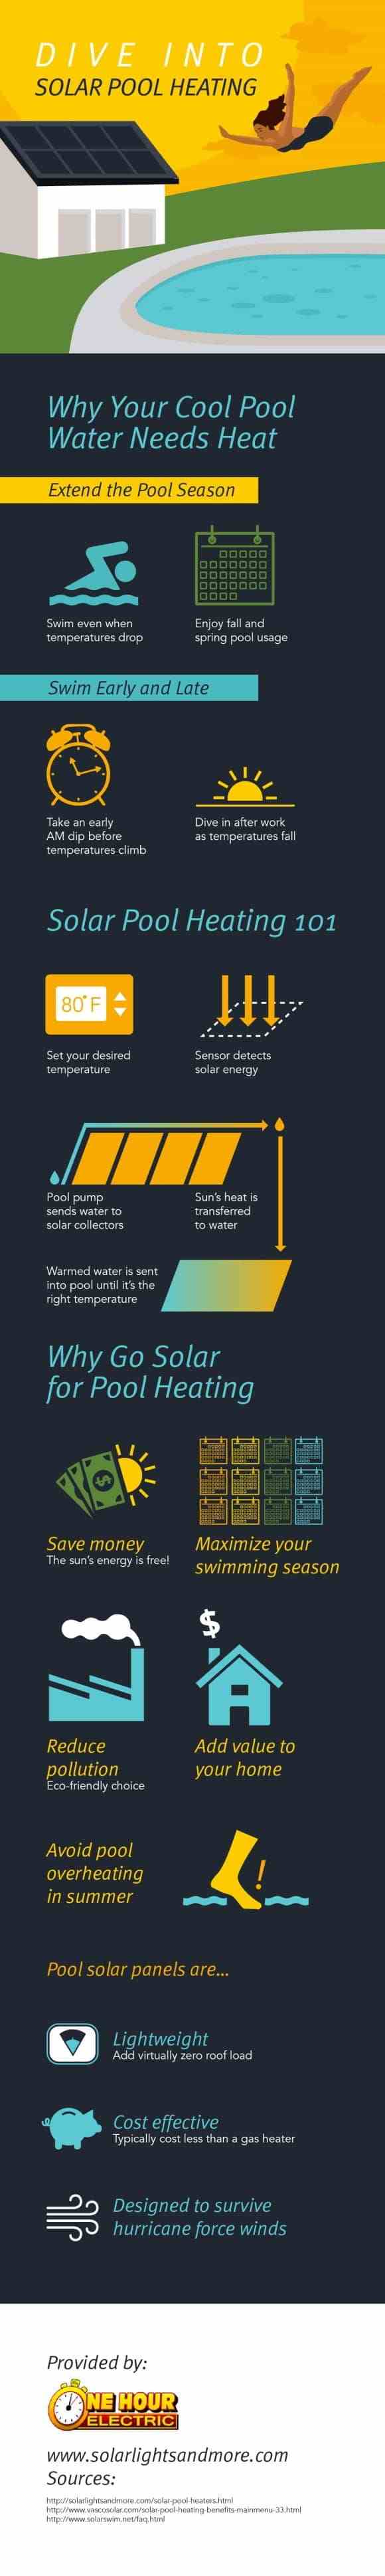 Infographic on Solar Pool Heating by Solar Lights & More